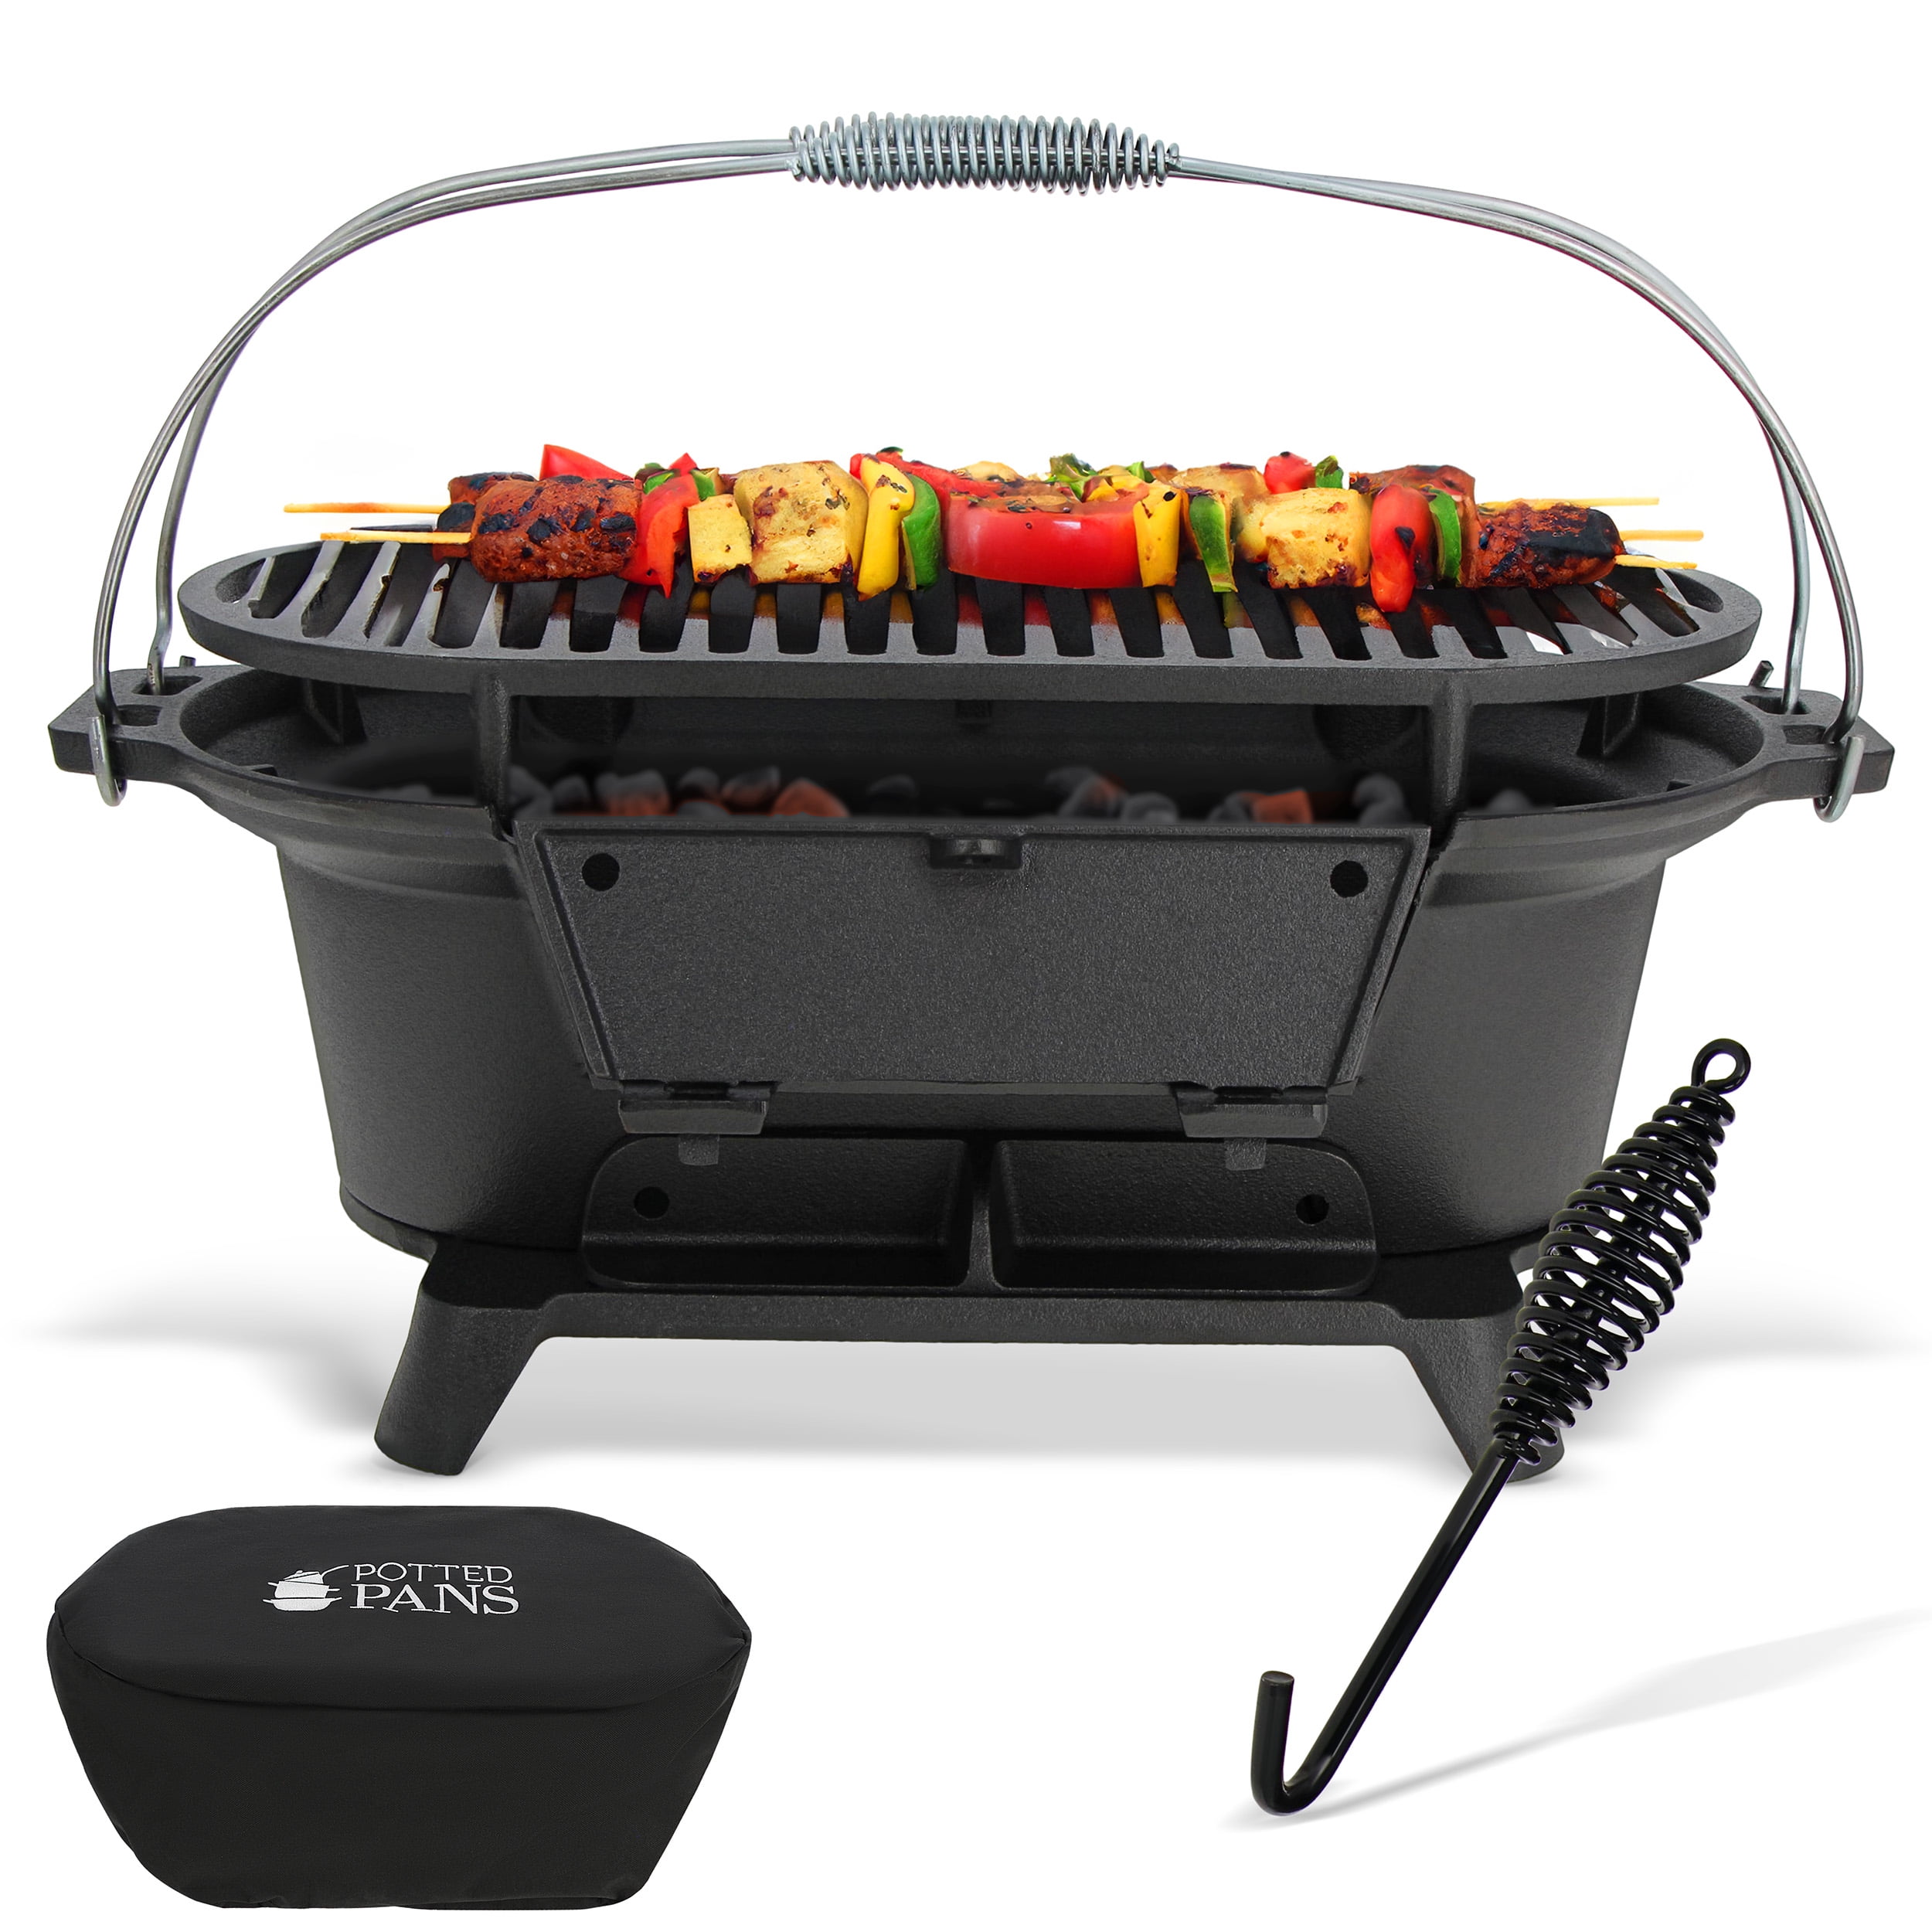 Portable Bbq Grill Outdoor Hot Pot Green High Capacity Bbq Grill Barbecues  Party Kebab Machine Plancha